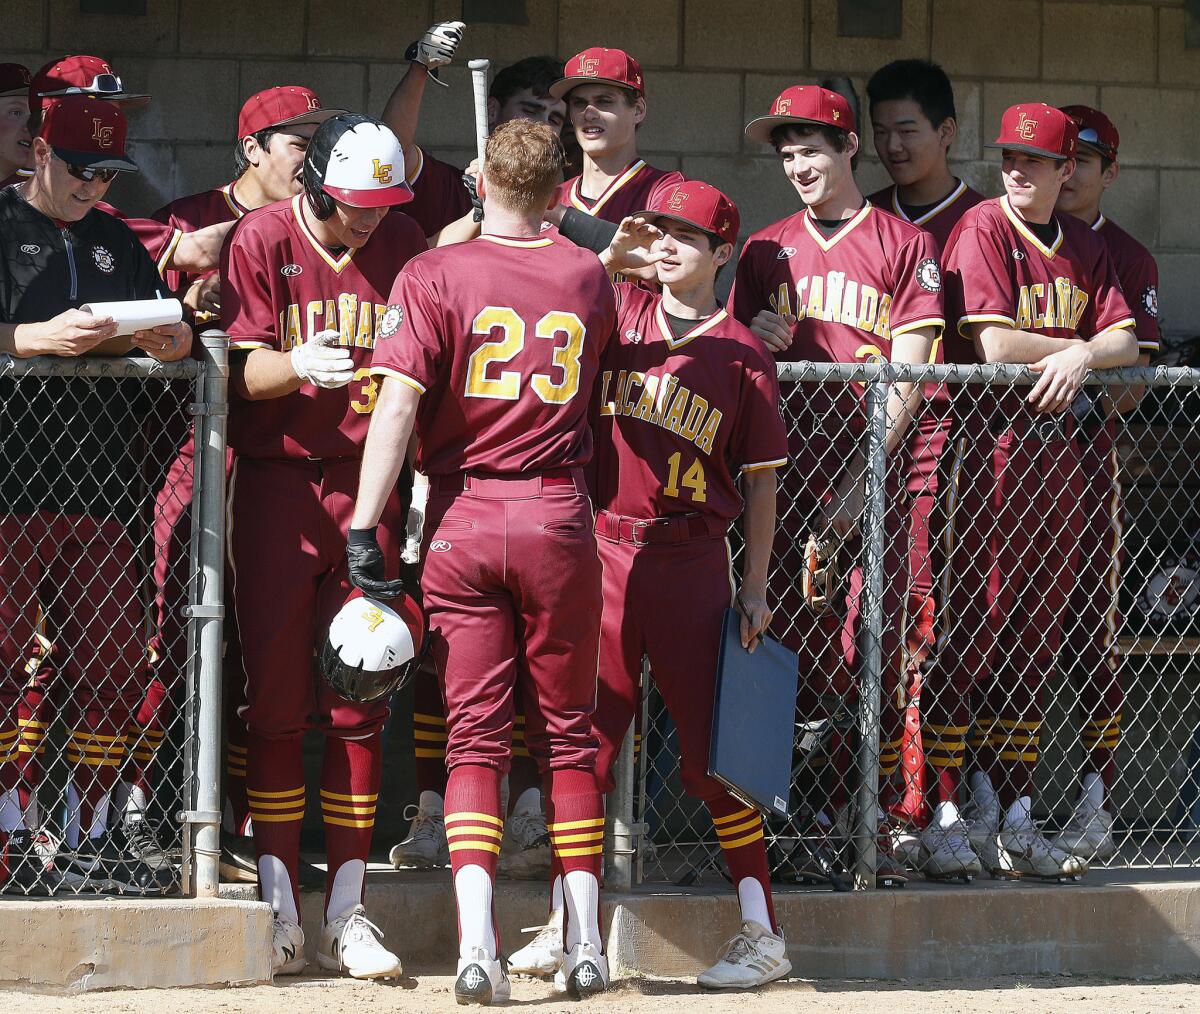 The La Canada HHigh baseball team advanced to the program's first-ever CIF championship game.